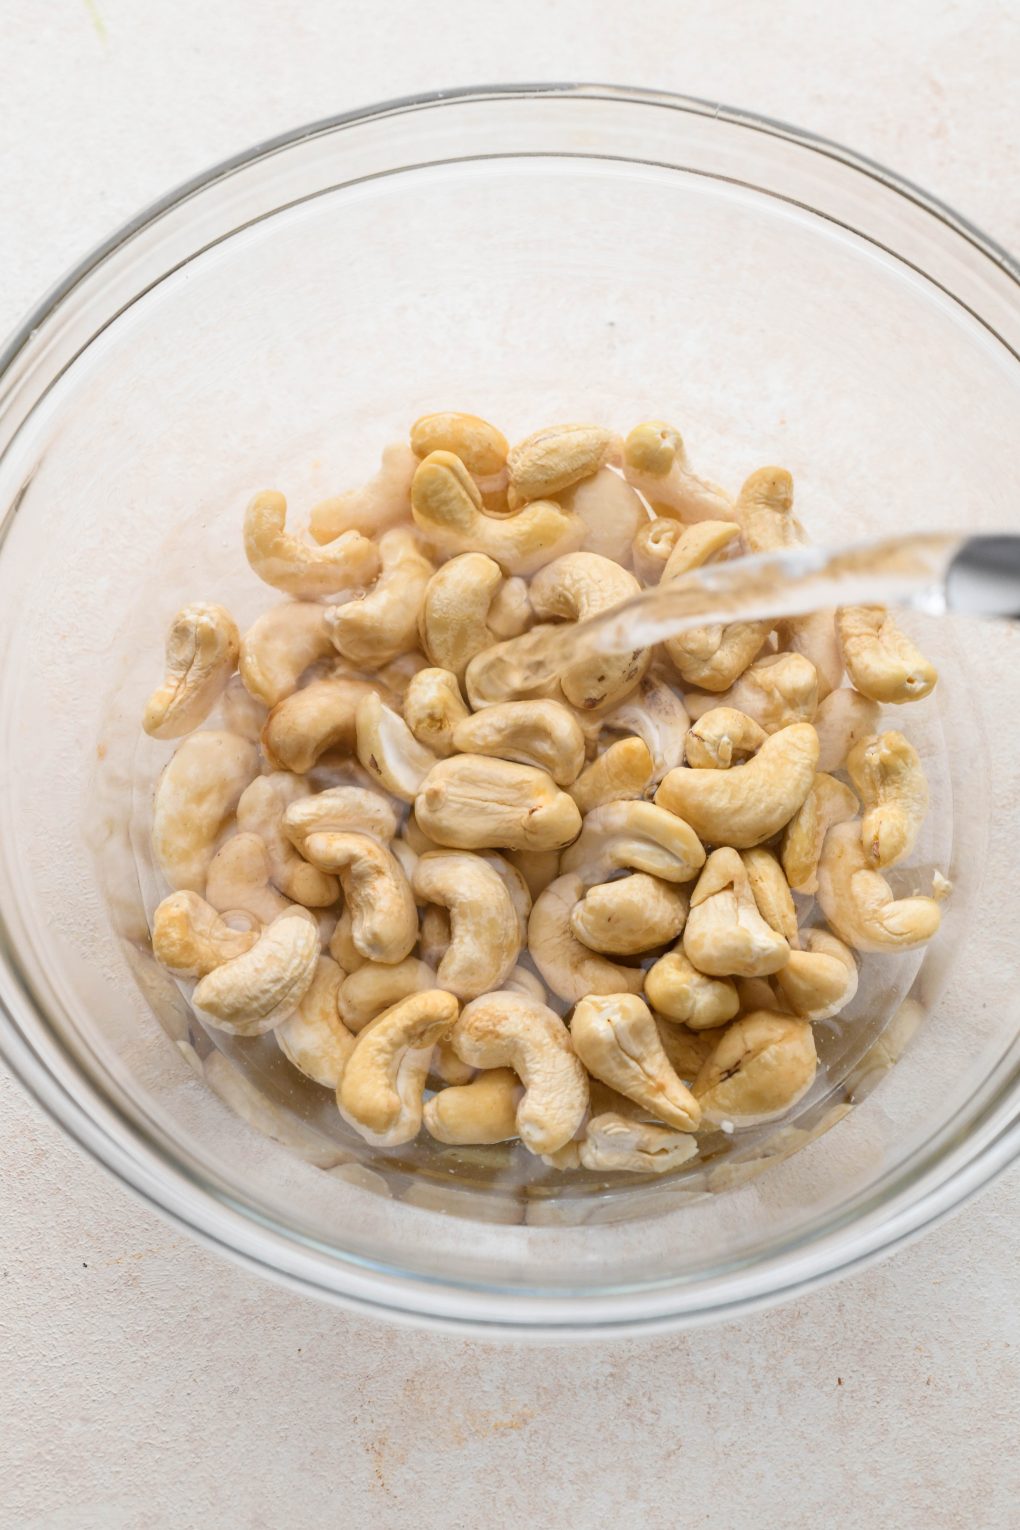 How to make healthy chicken sausage pasta: soaking raw cashews in hot water.